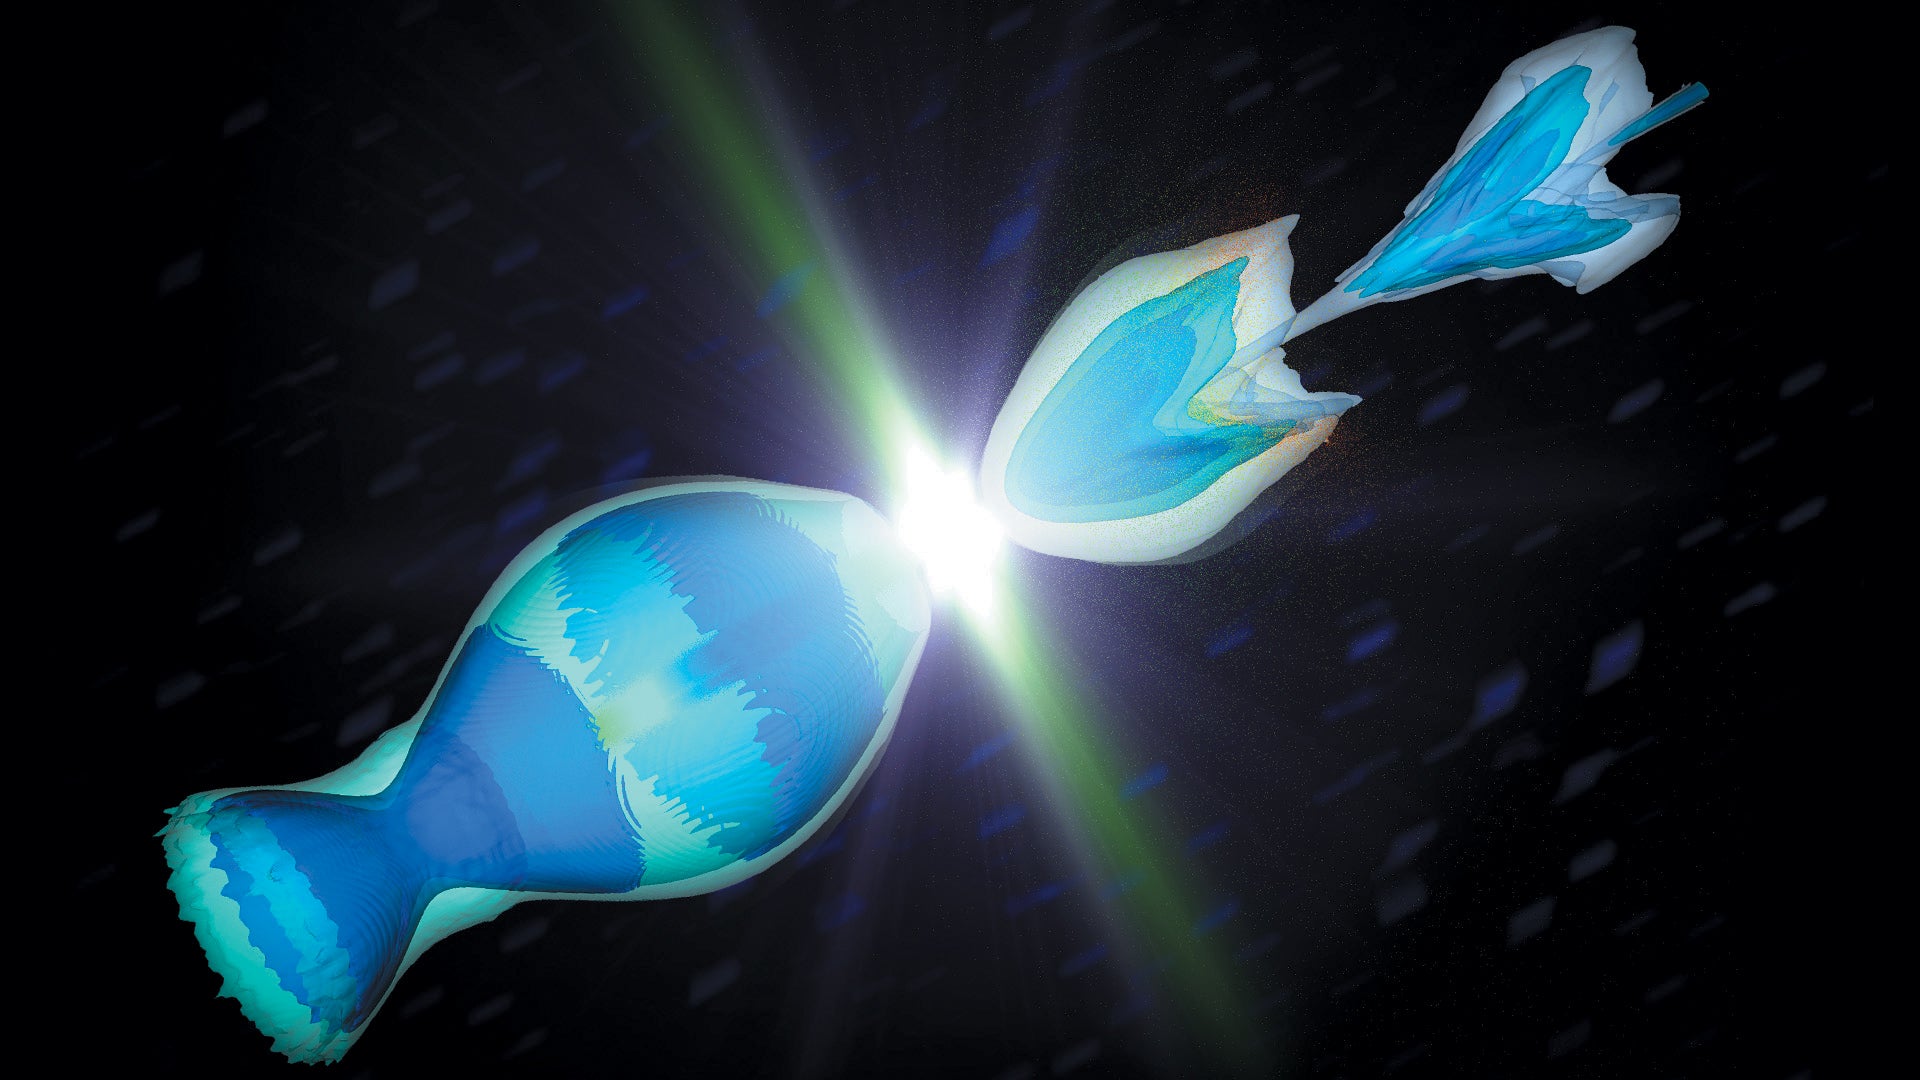 Electrons and positrons accelerated by plasma collide in this computer simulation of the advanced acceleration scheme.